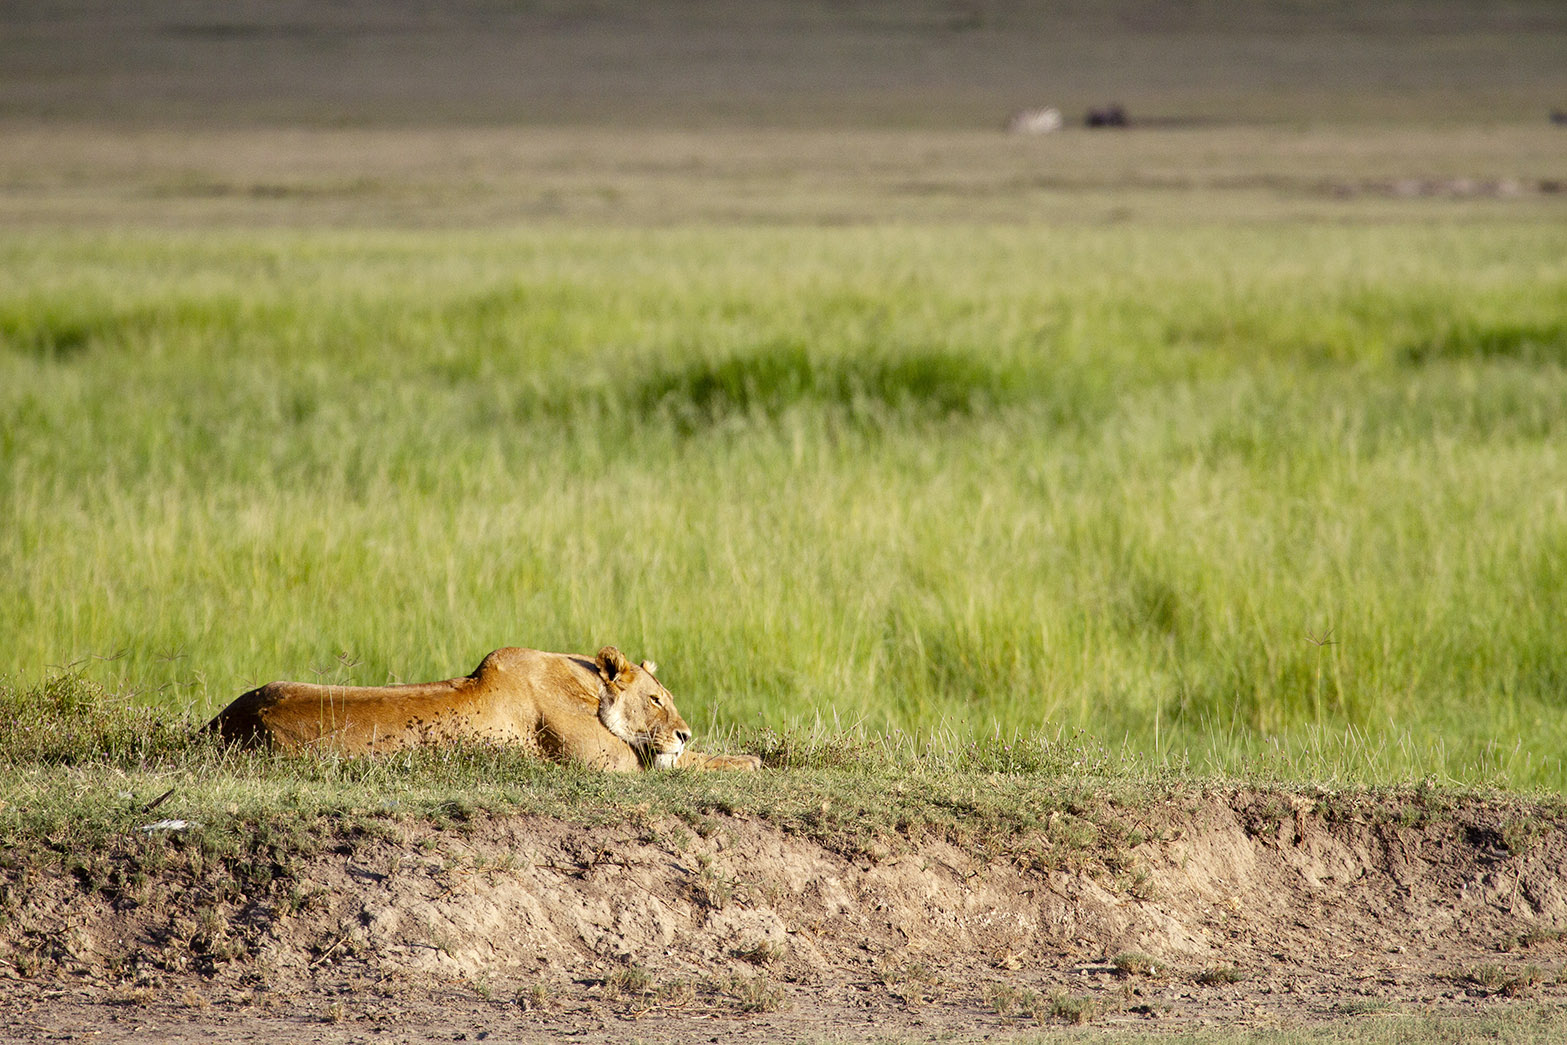 A lioness relaxing in the grass of Ngorongoro Crater